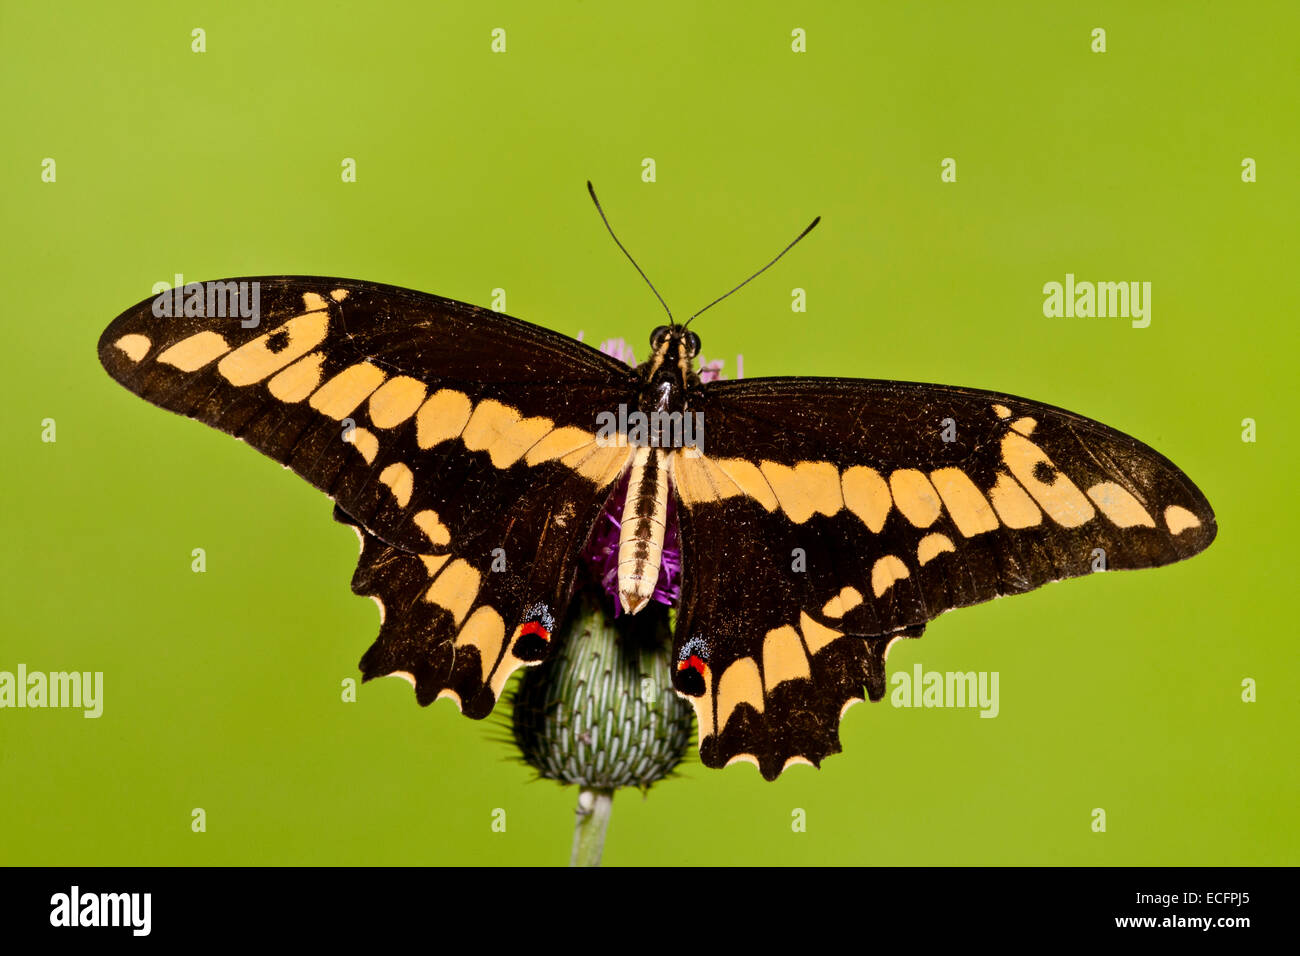 Giant swallowtail butterfly Banque D'Images